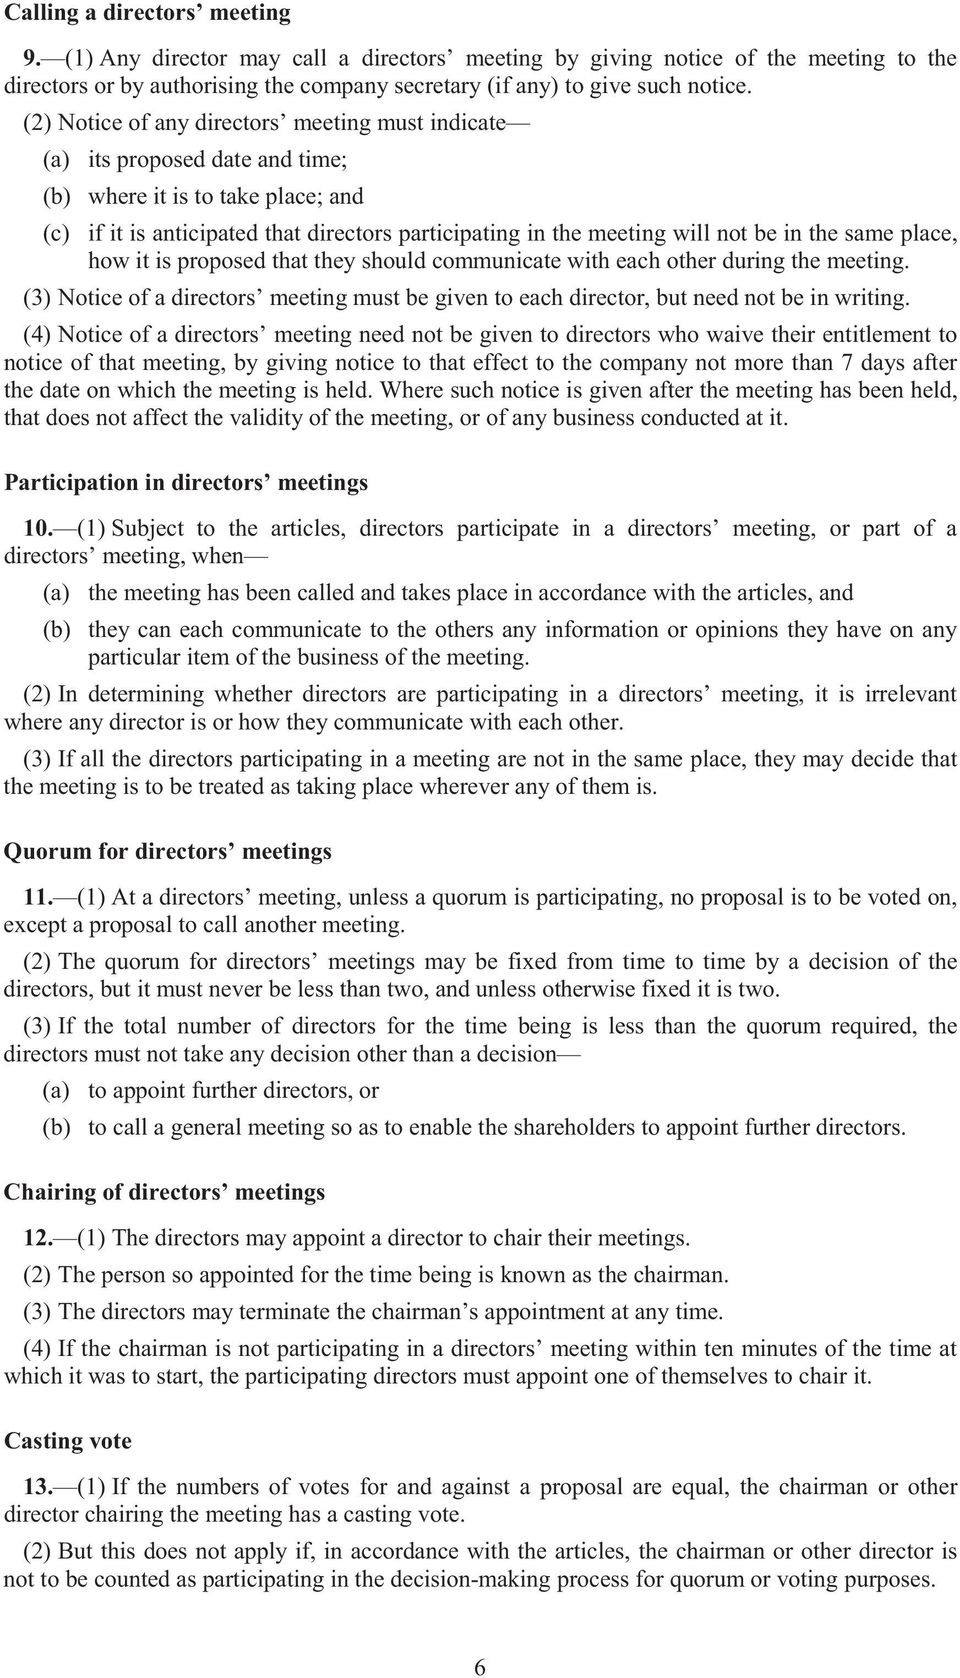 in the same place, how it is proposed that they should communicate with each other during the meeting. (3) Notice of a directors meeting must be given to each director, but need not be in writing.